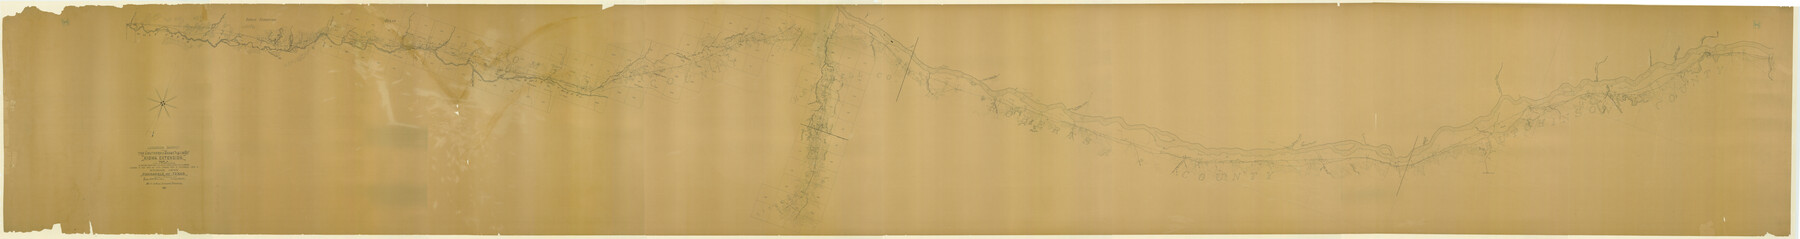 88837, Location Survey of the Southern Kansas Railway, Kiowa Extension from a point in Drake's Location, in Indian Territory 100 miles from south line of Kansas, continuing up Wolf Creek and South Canadian River to Cottonwood Creek in Hutchinson County, General Map Collection